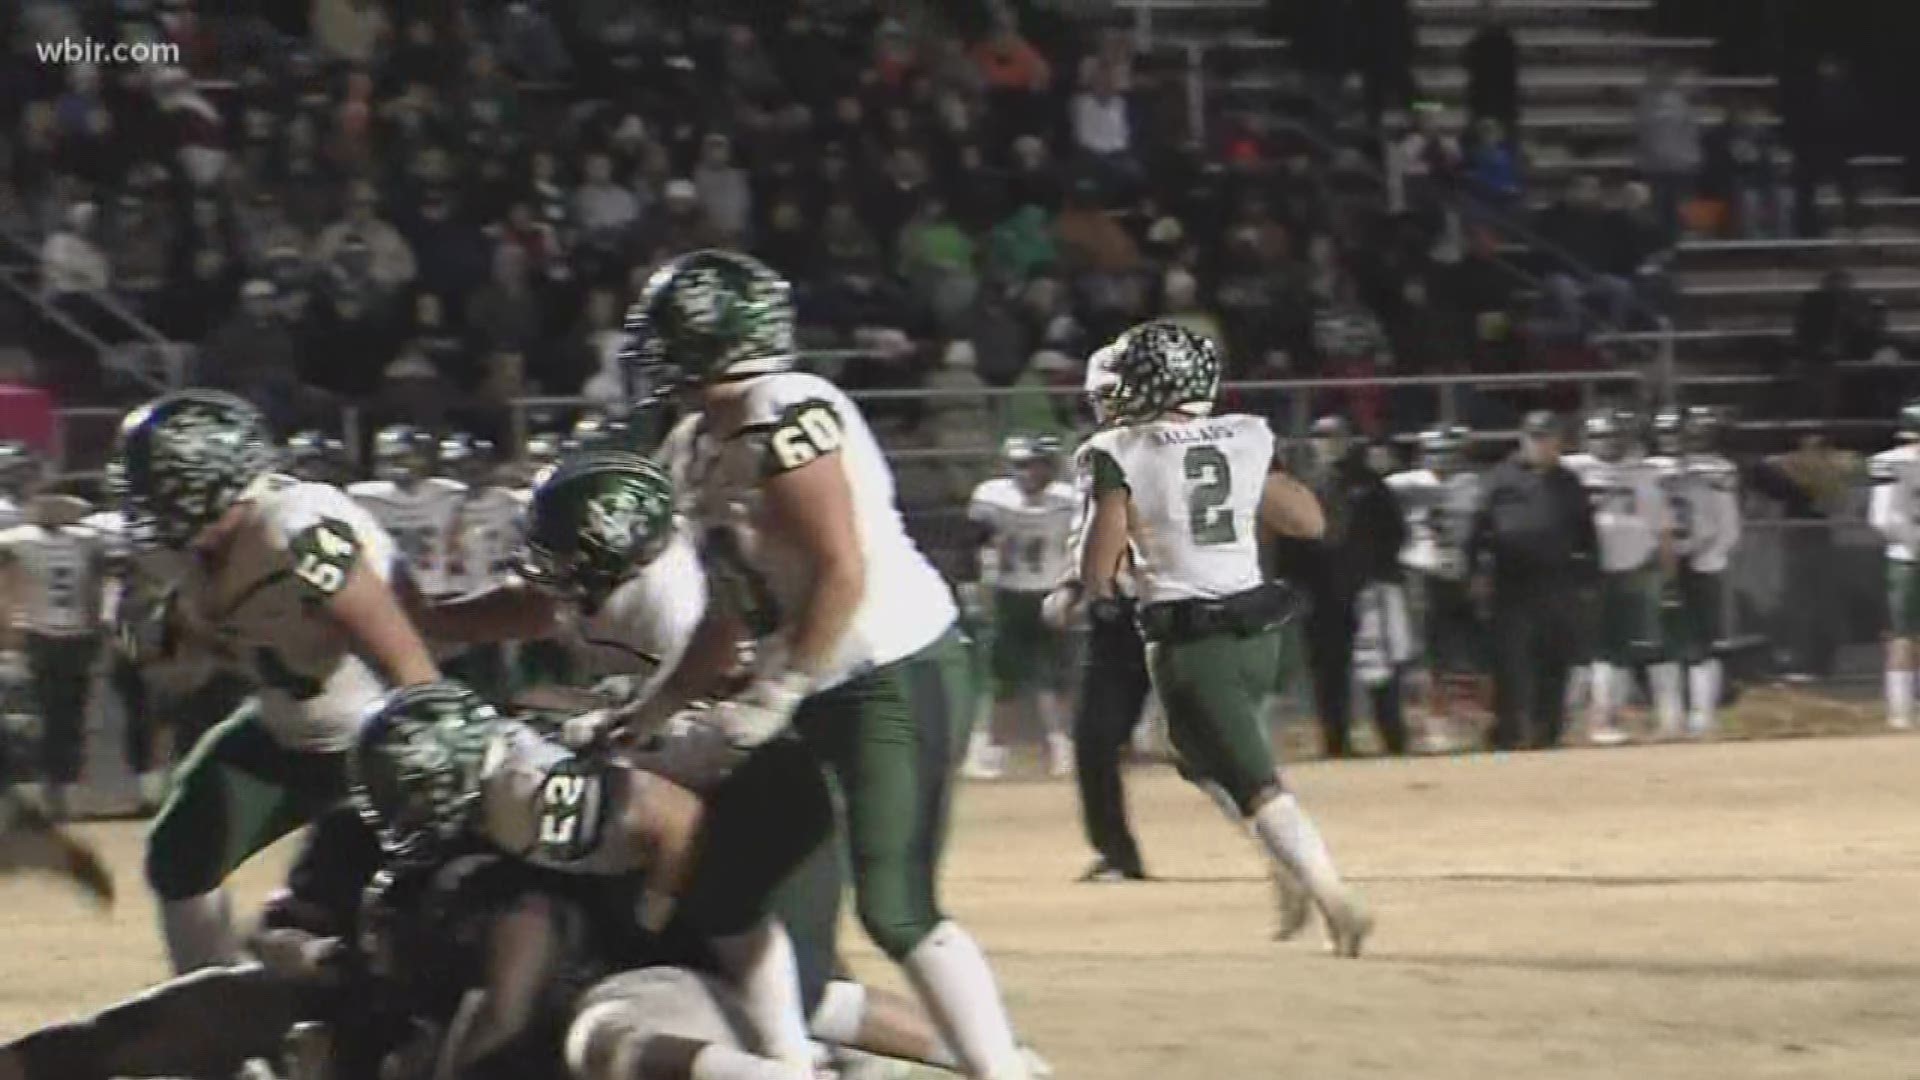 Greeneville advances to the state championship.